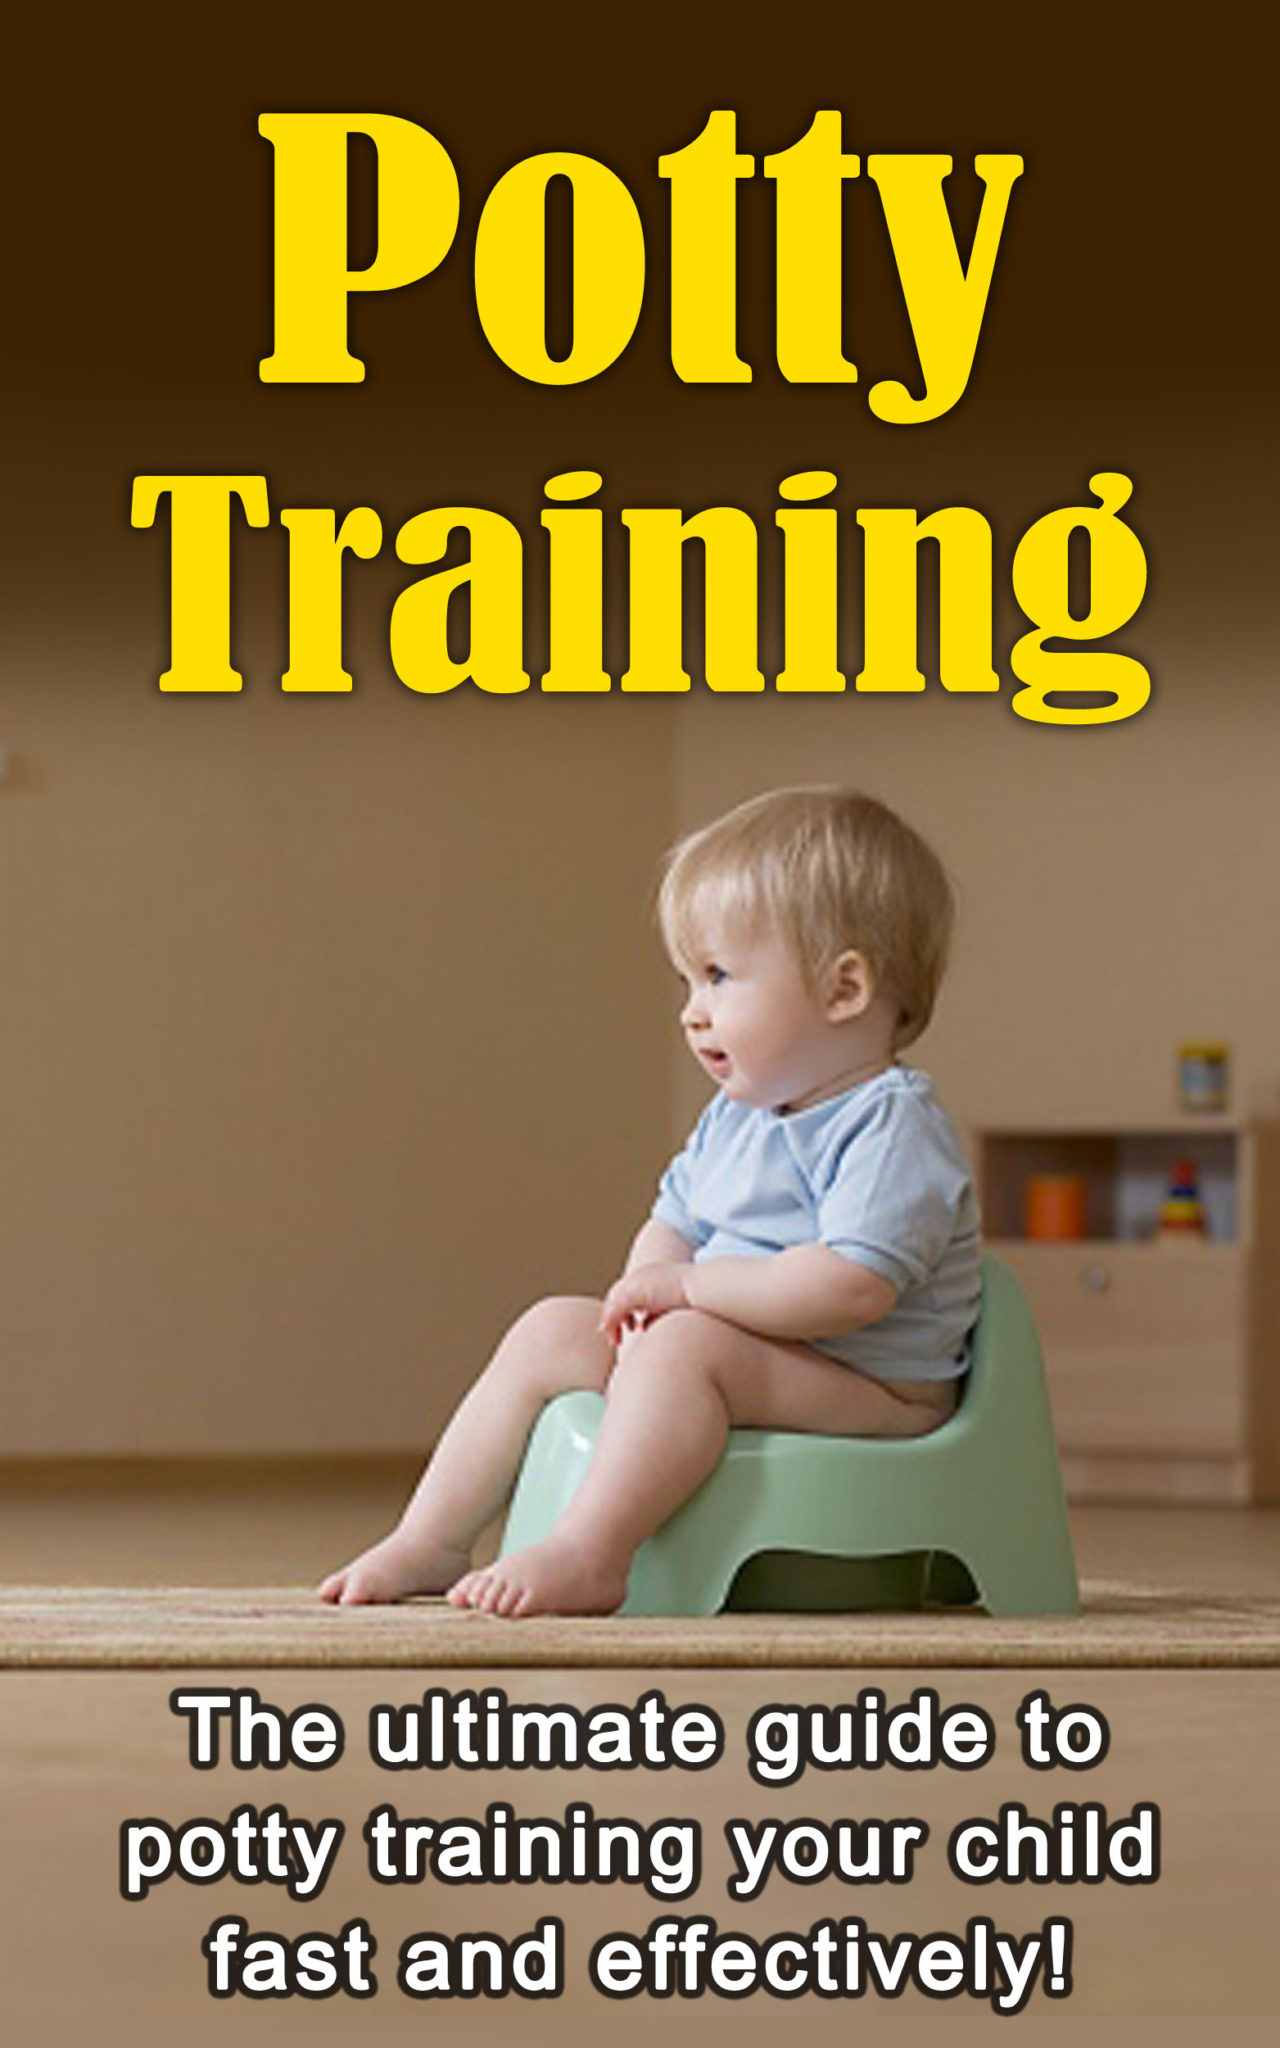 FREE: Potty Training: The ultimate guide to potty training your child fast and effectively! by Judith Dare